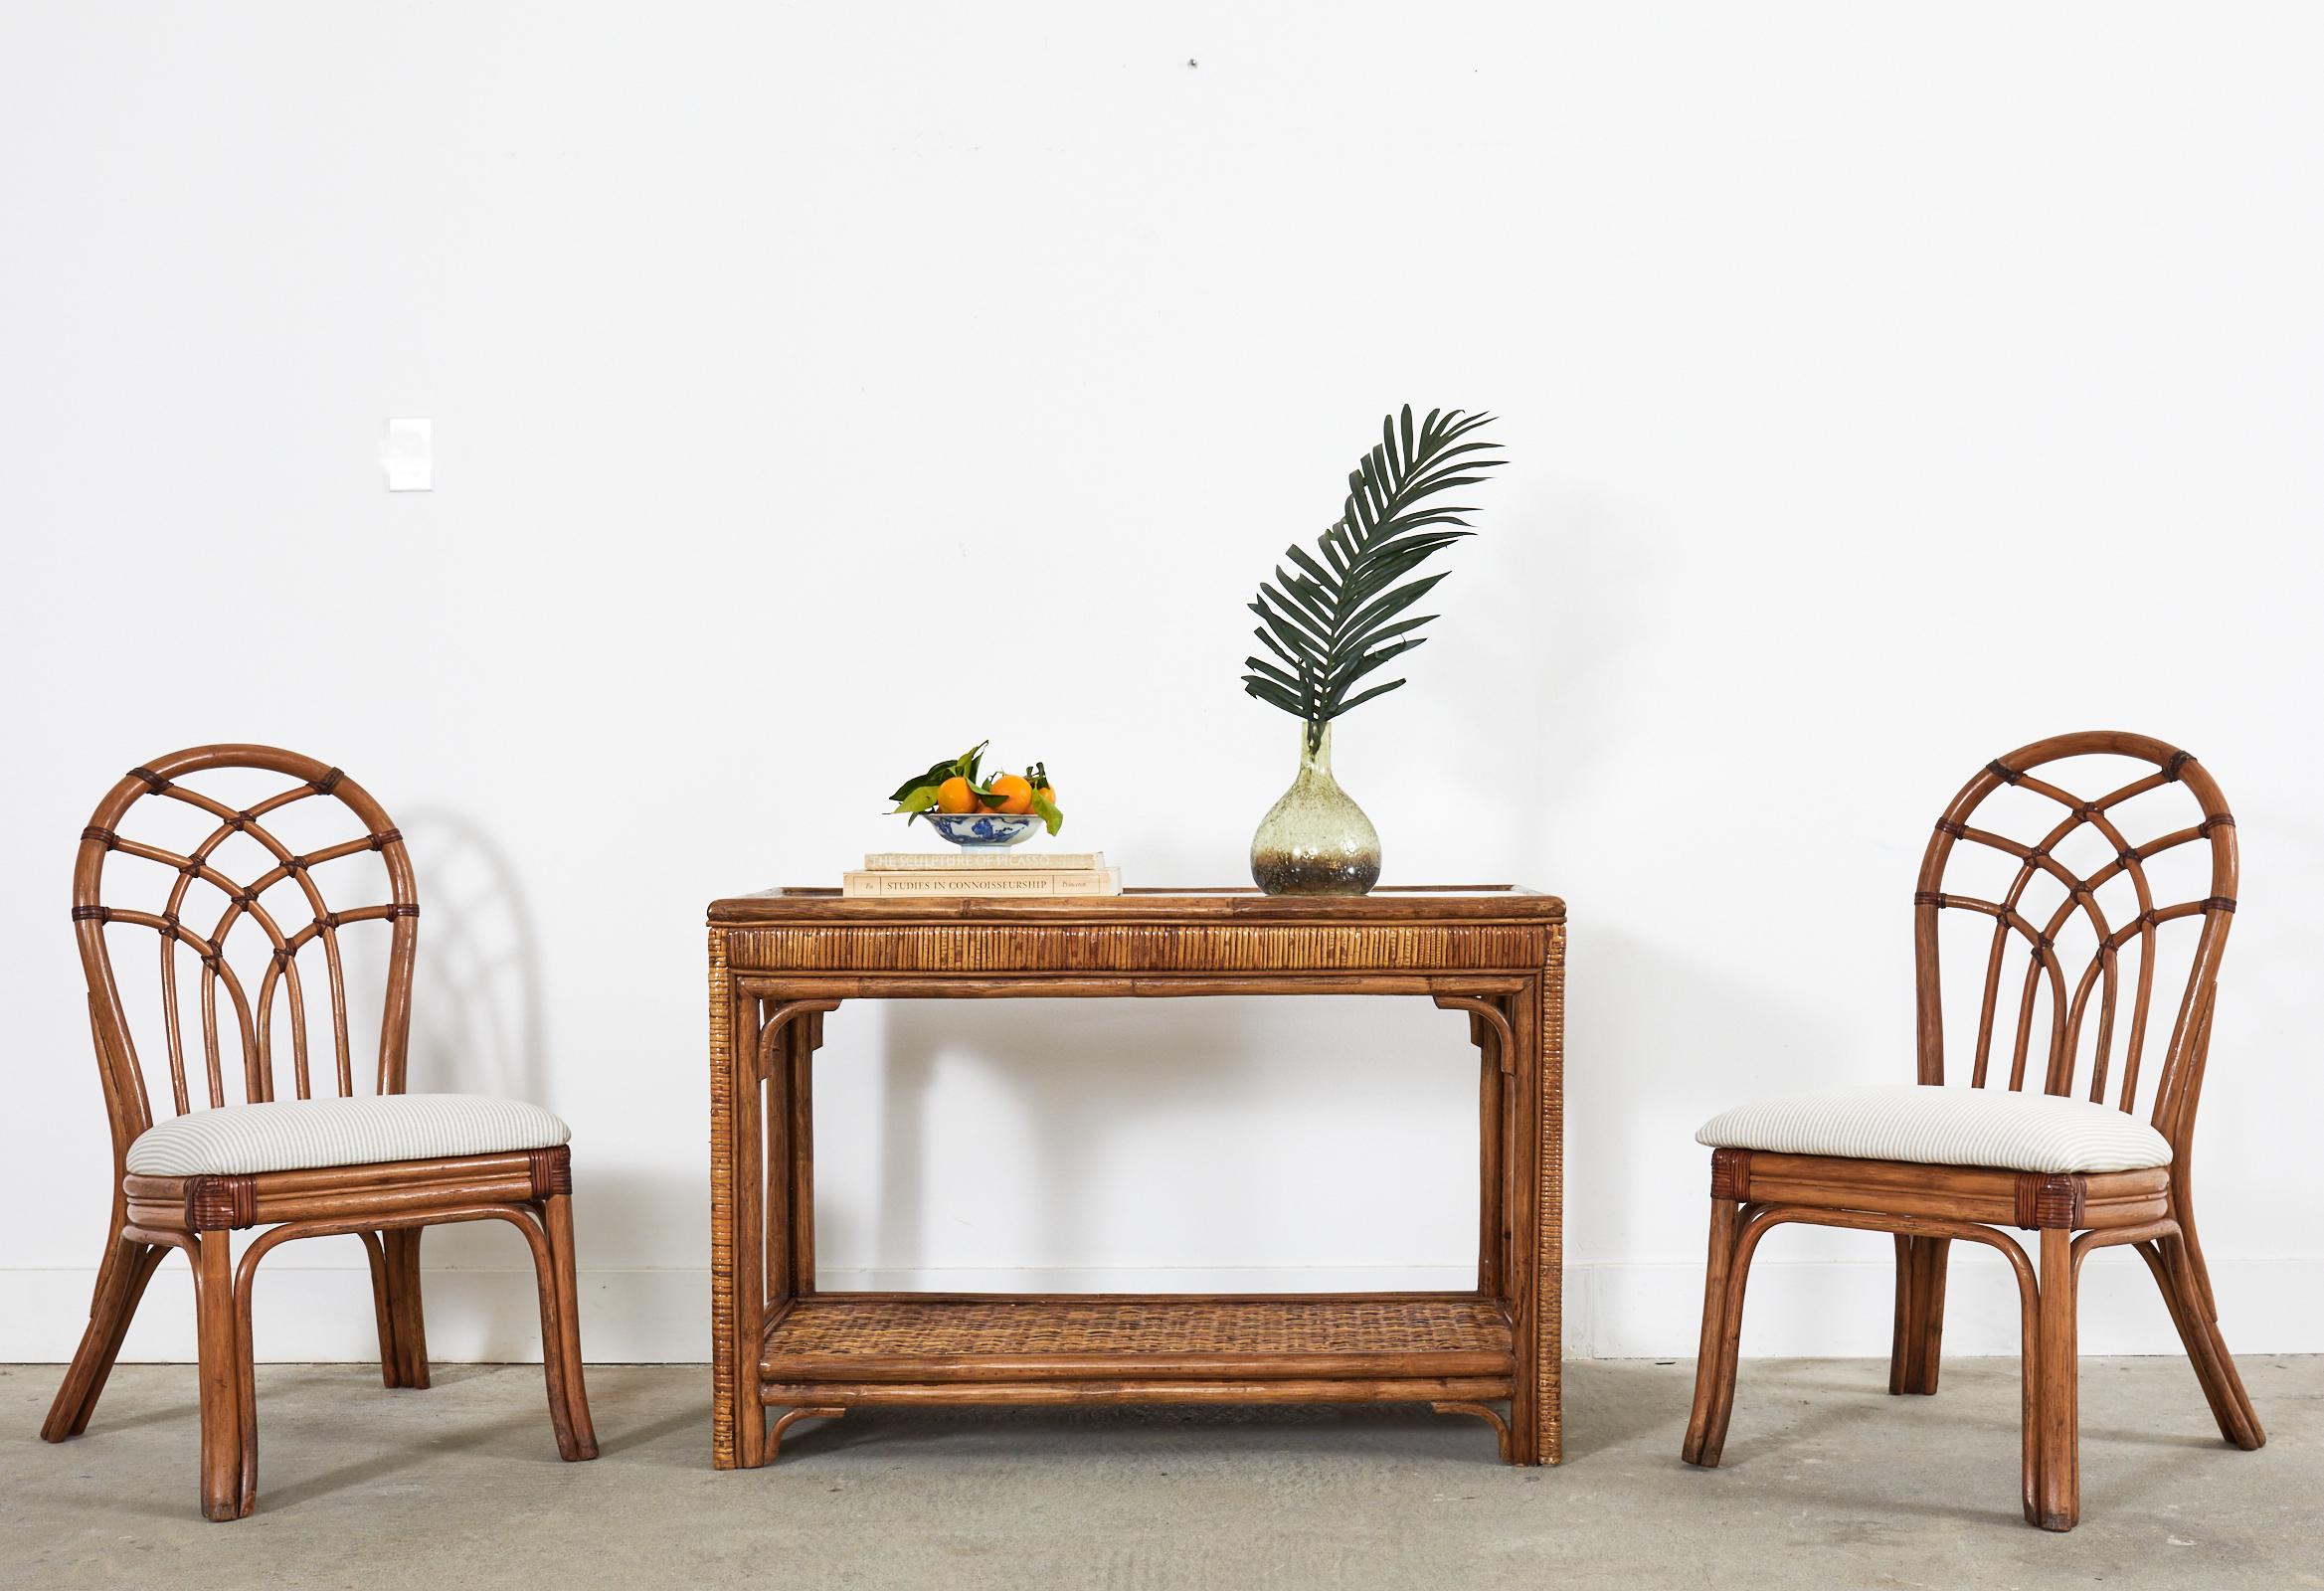 Handsome mid-century organic modern two-tier console table or sofa table. The console features a rattan frame with decorative bamboo veneered sides and legs. The bottom shelf has a woven rattan inset and the top has a geometric open fretwork design